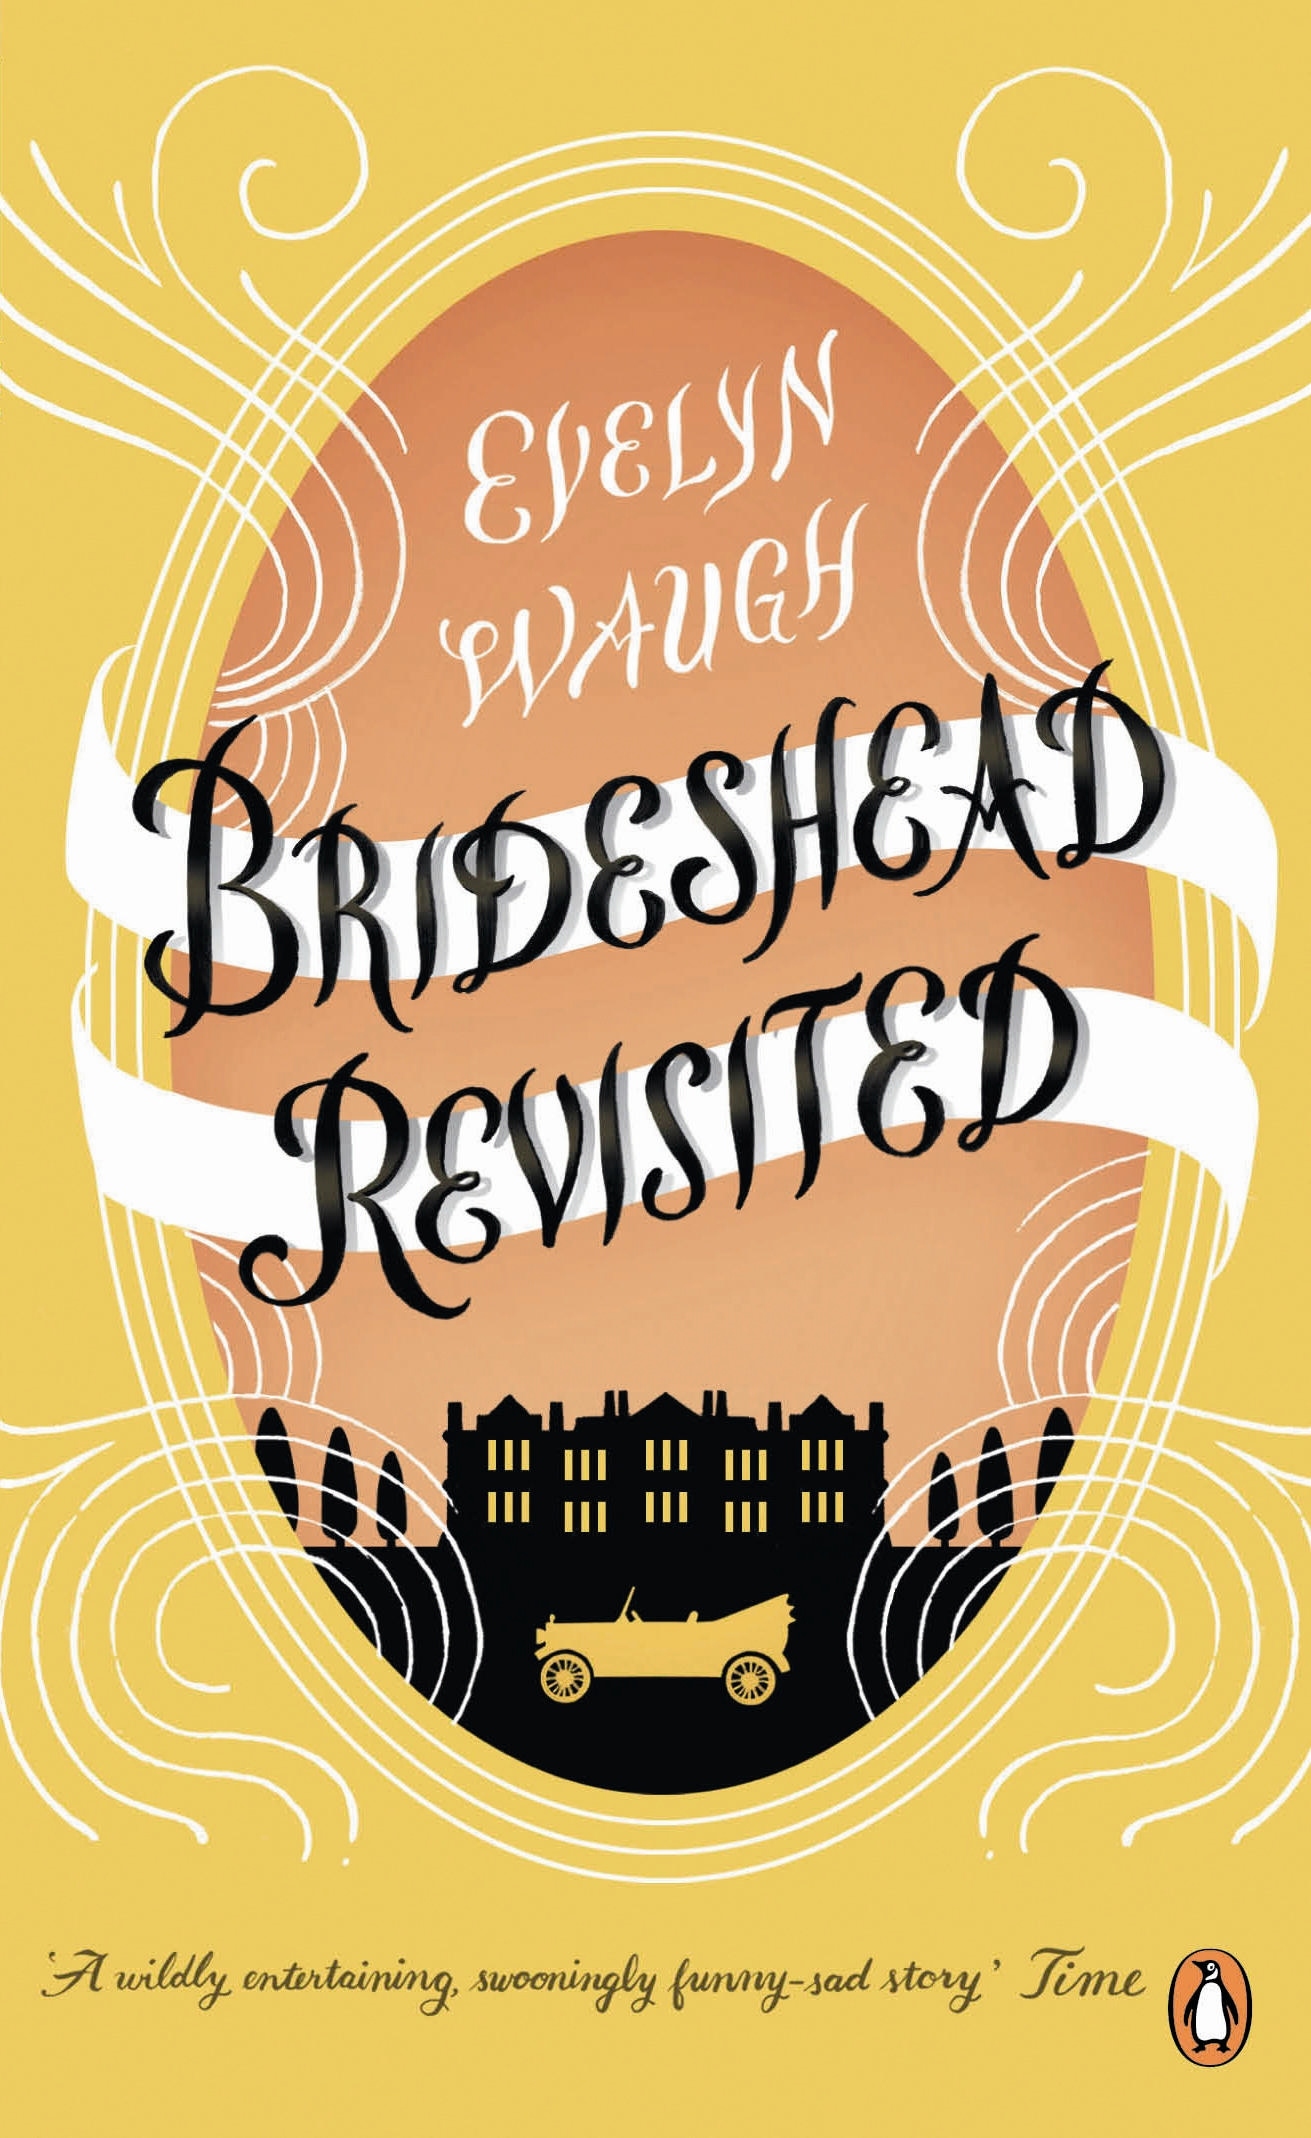 Brideshead Revisited, by Evelyn Waugh